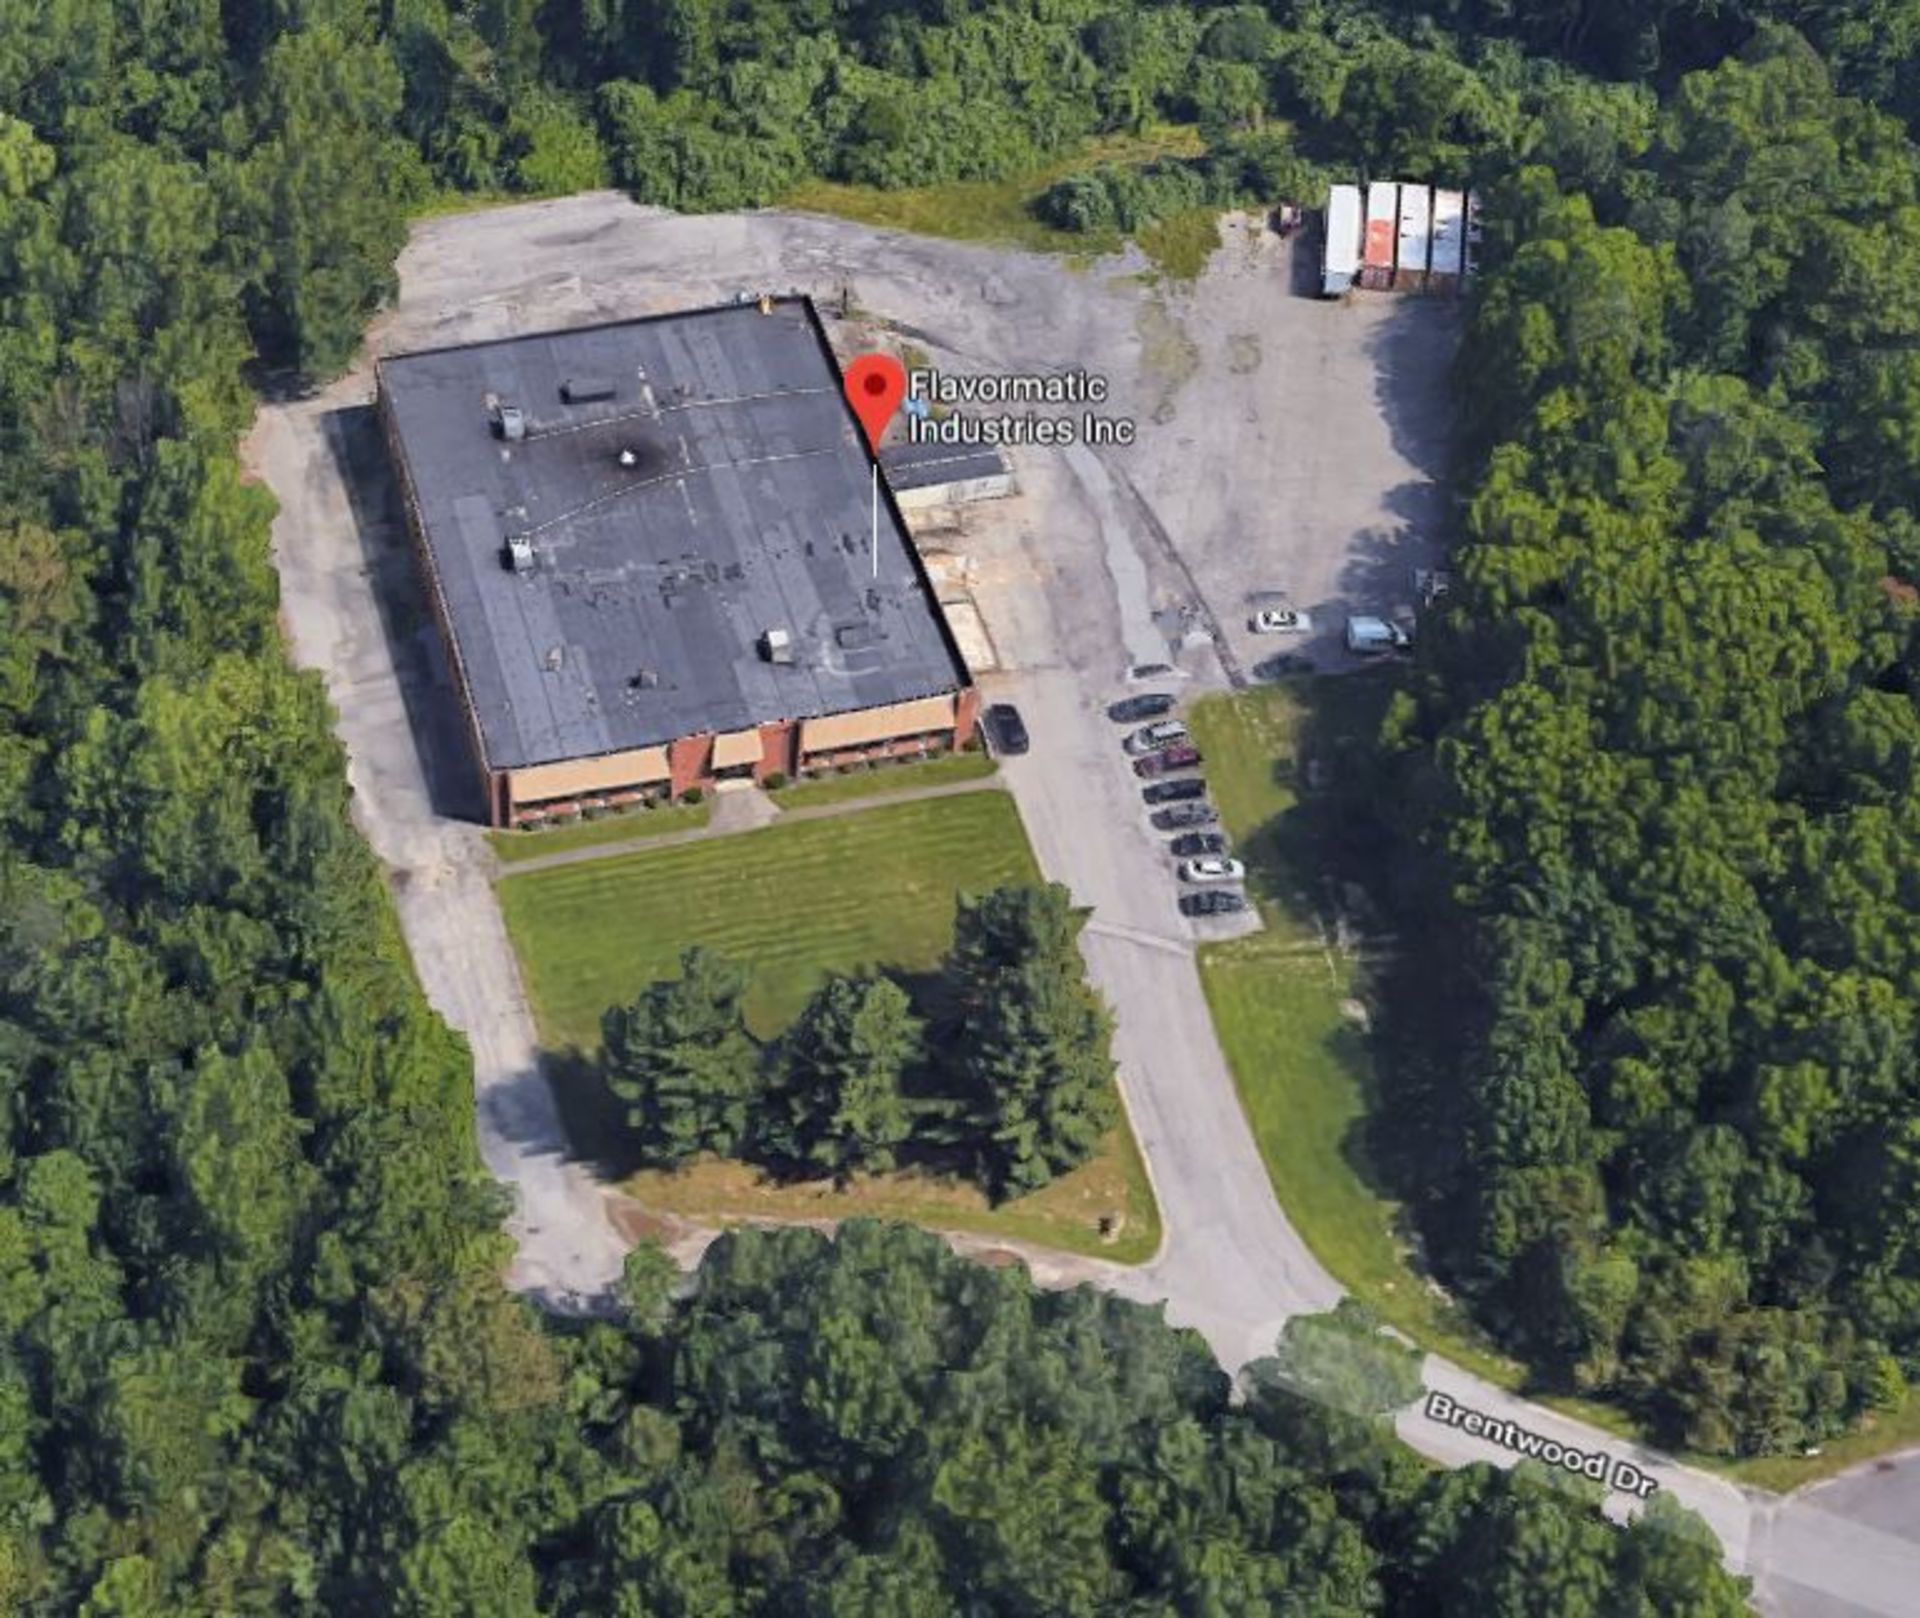 REAL PROPERTY - 23 Acres Situate in Dutchess County, NY. Includes 20,120sq ft Building